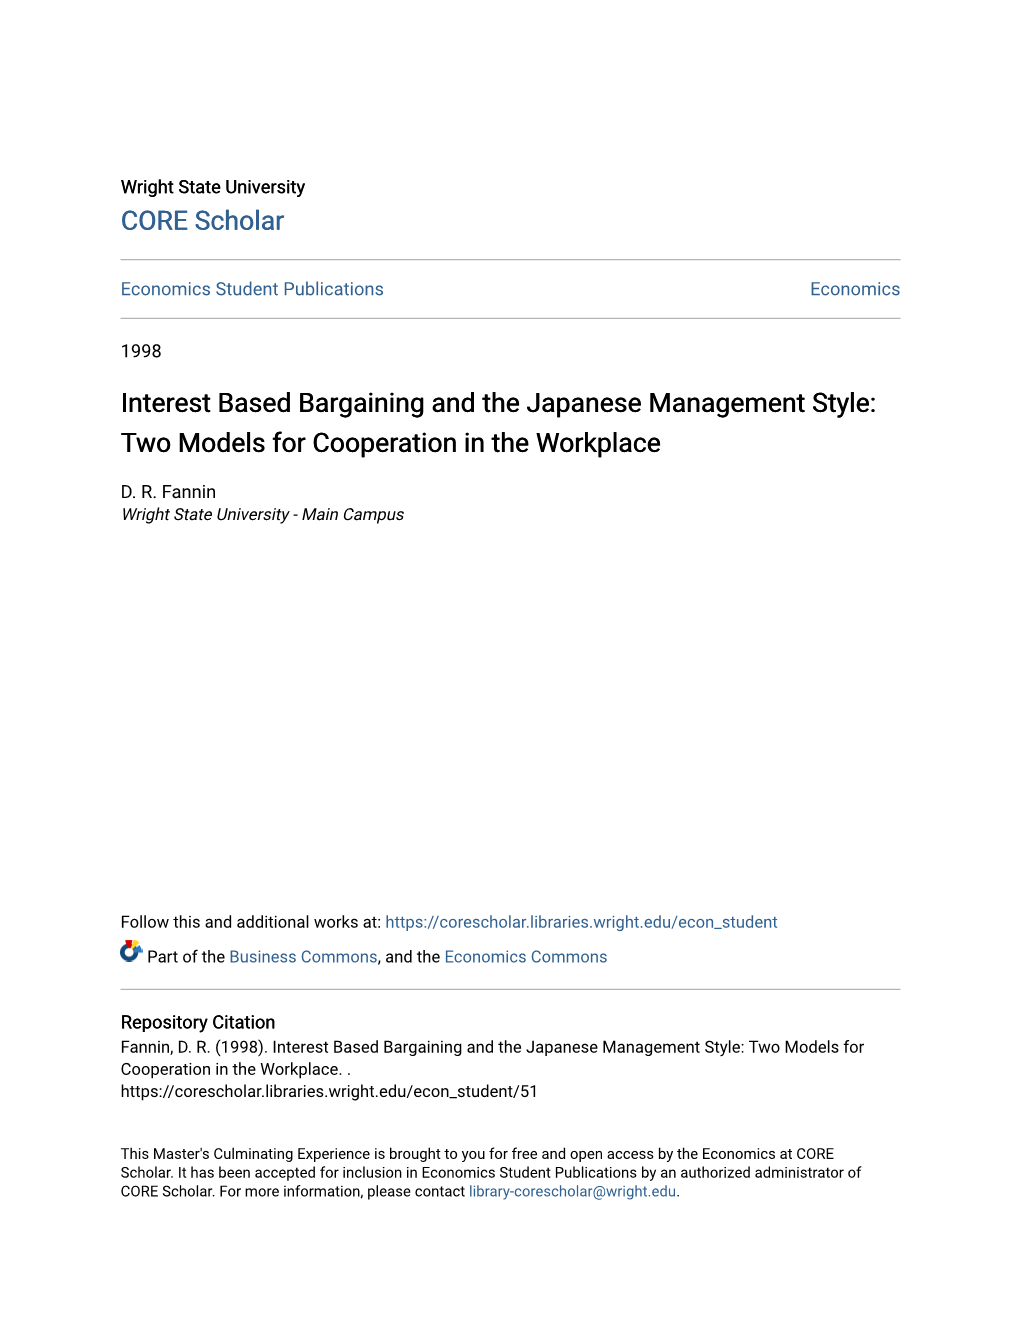 Interest Based Bargaining and the Japanese Management Style: Two Models for Cooperation in the Workplace